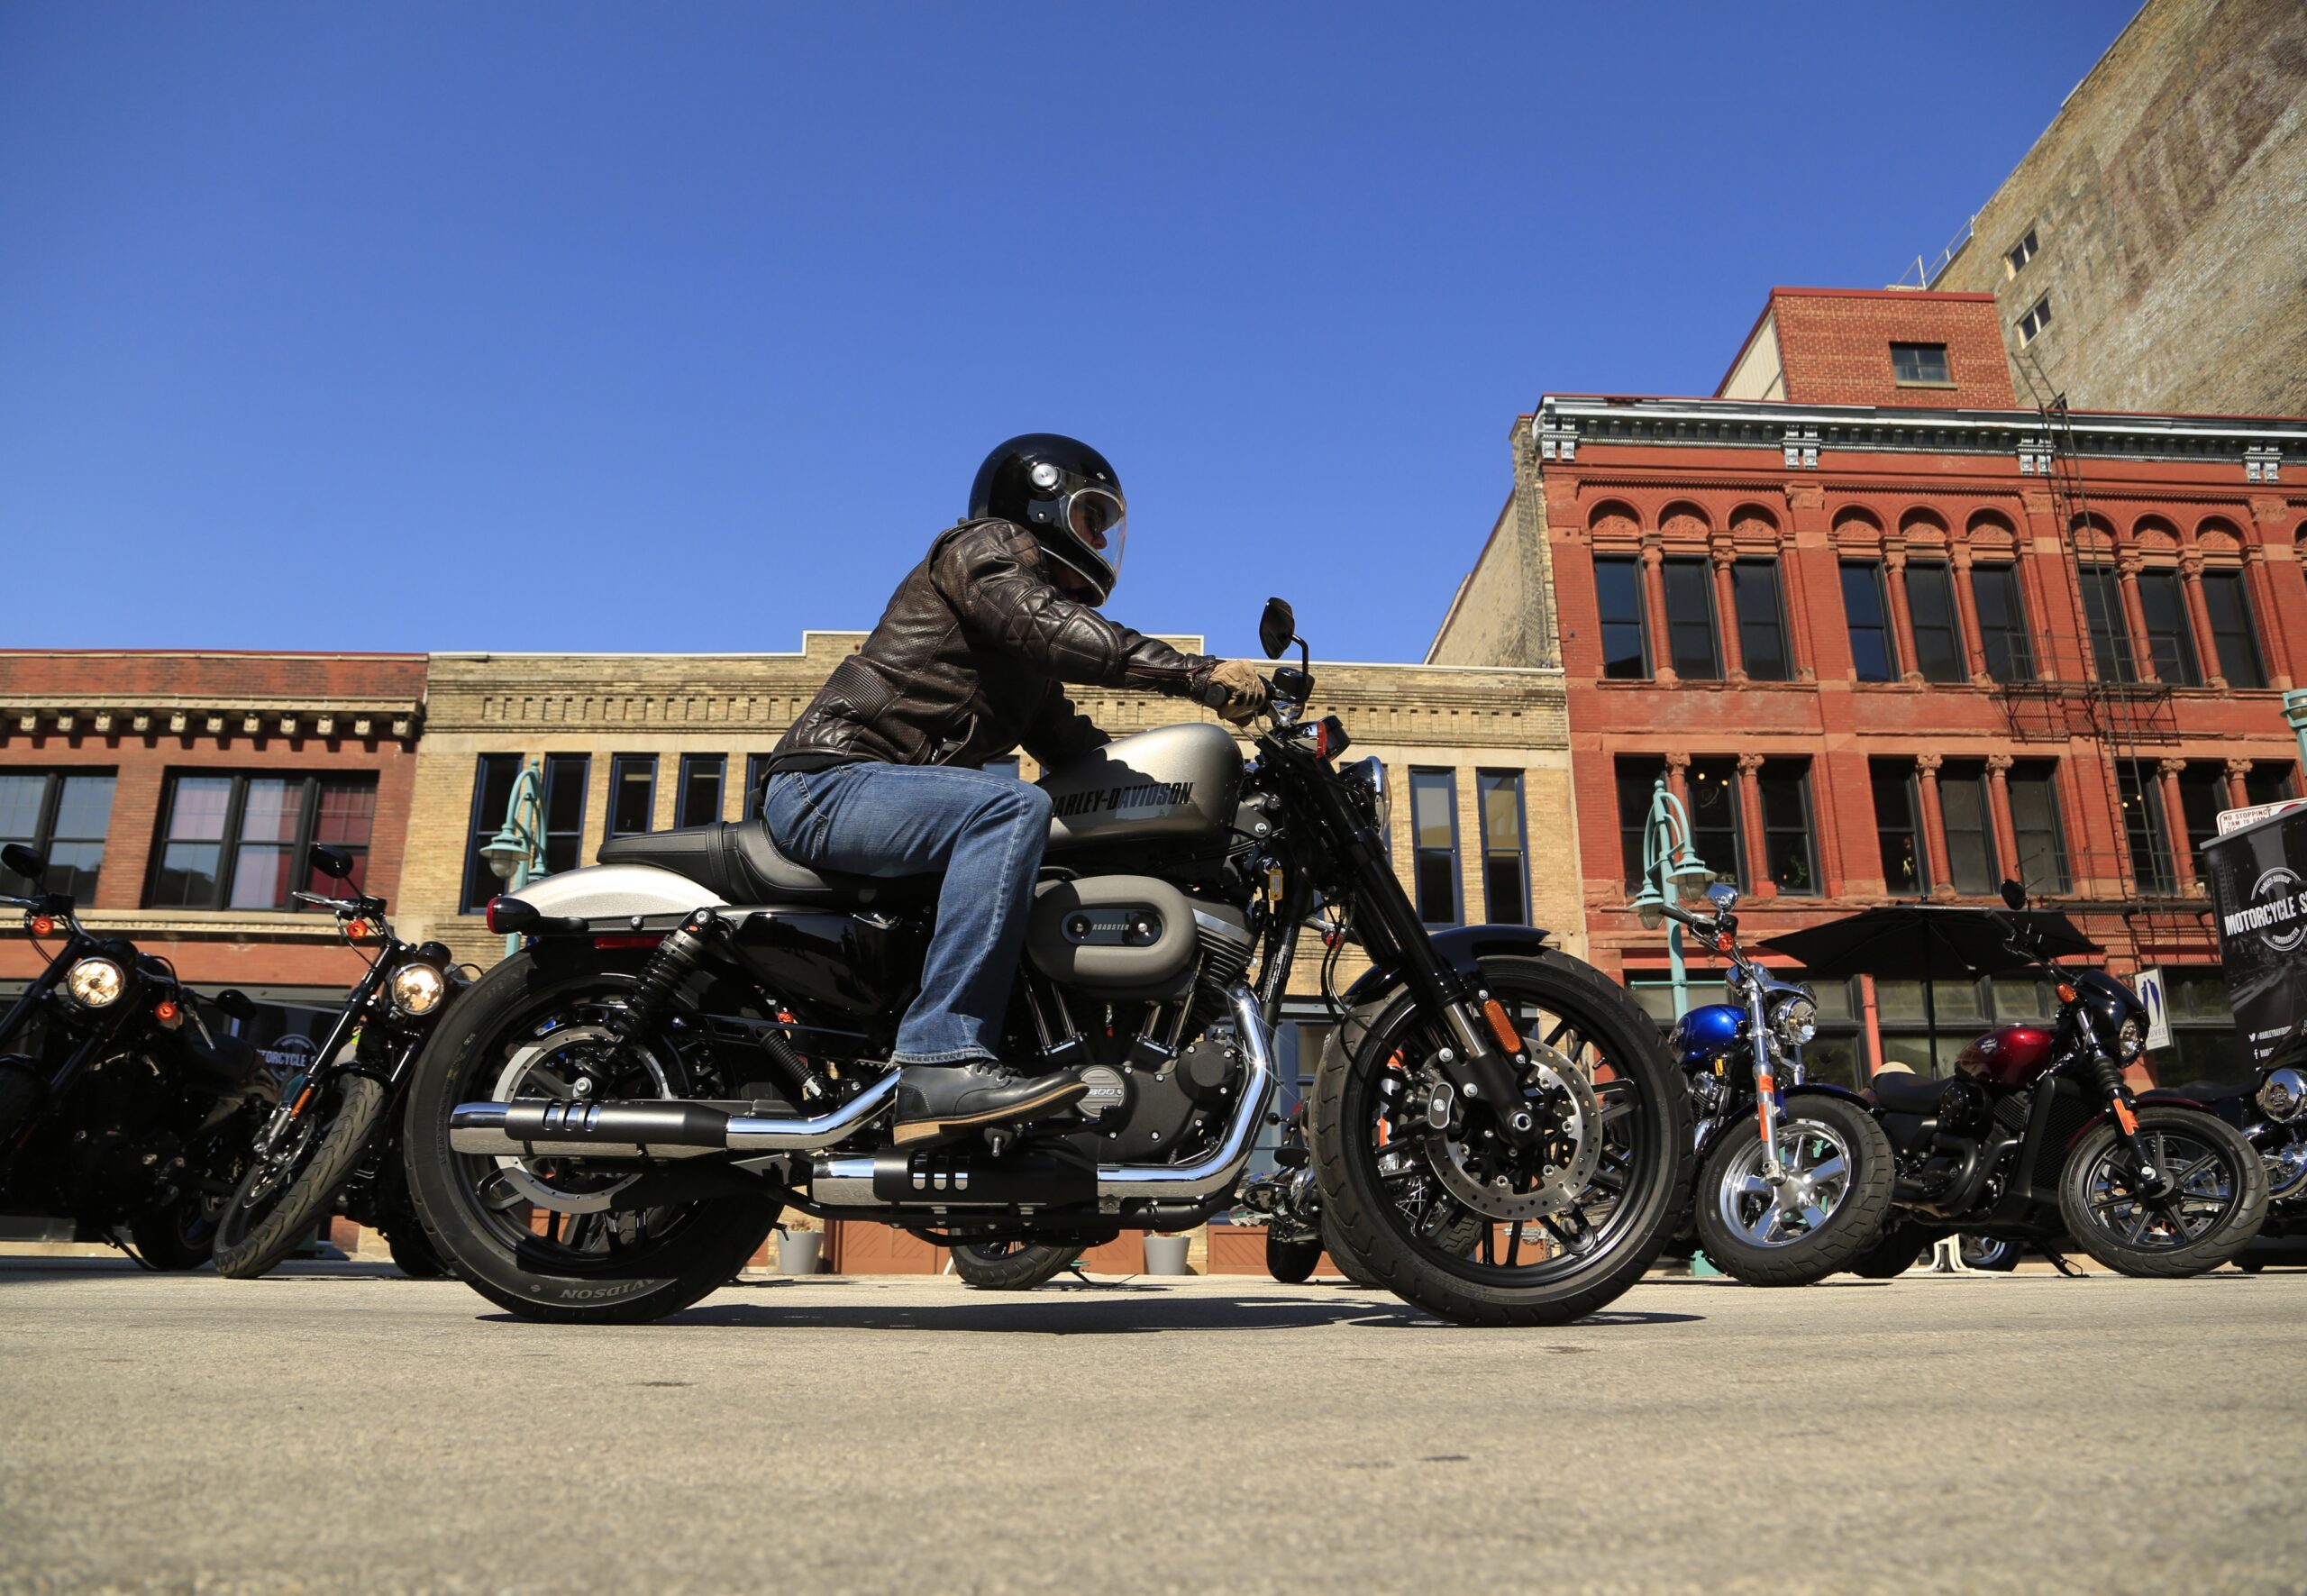 Harley-Davidson’s Quarterly Earnings Continue To Fall